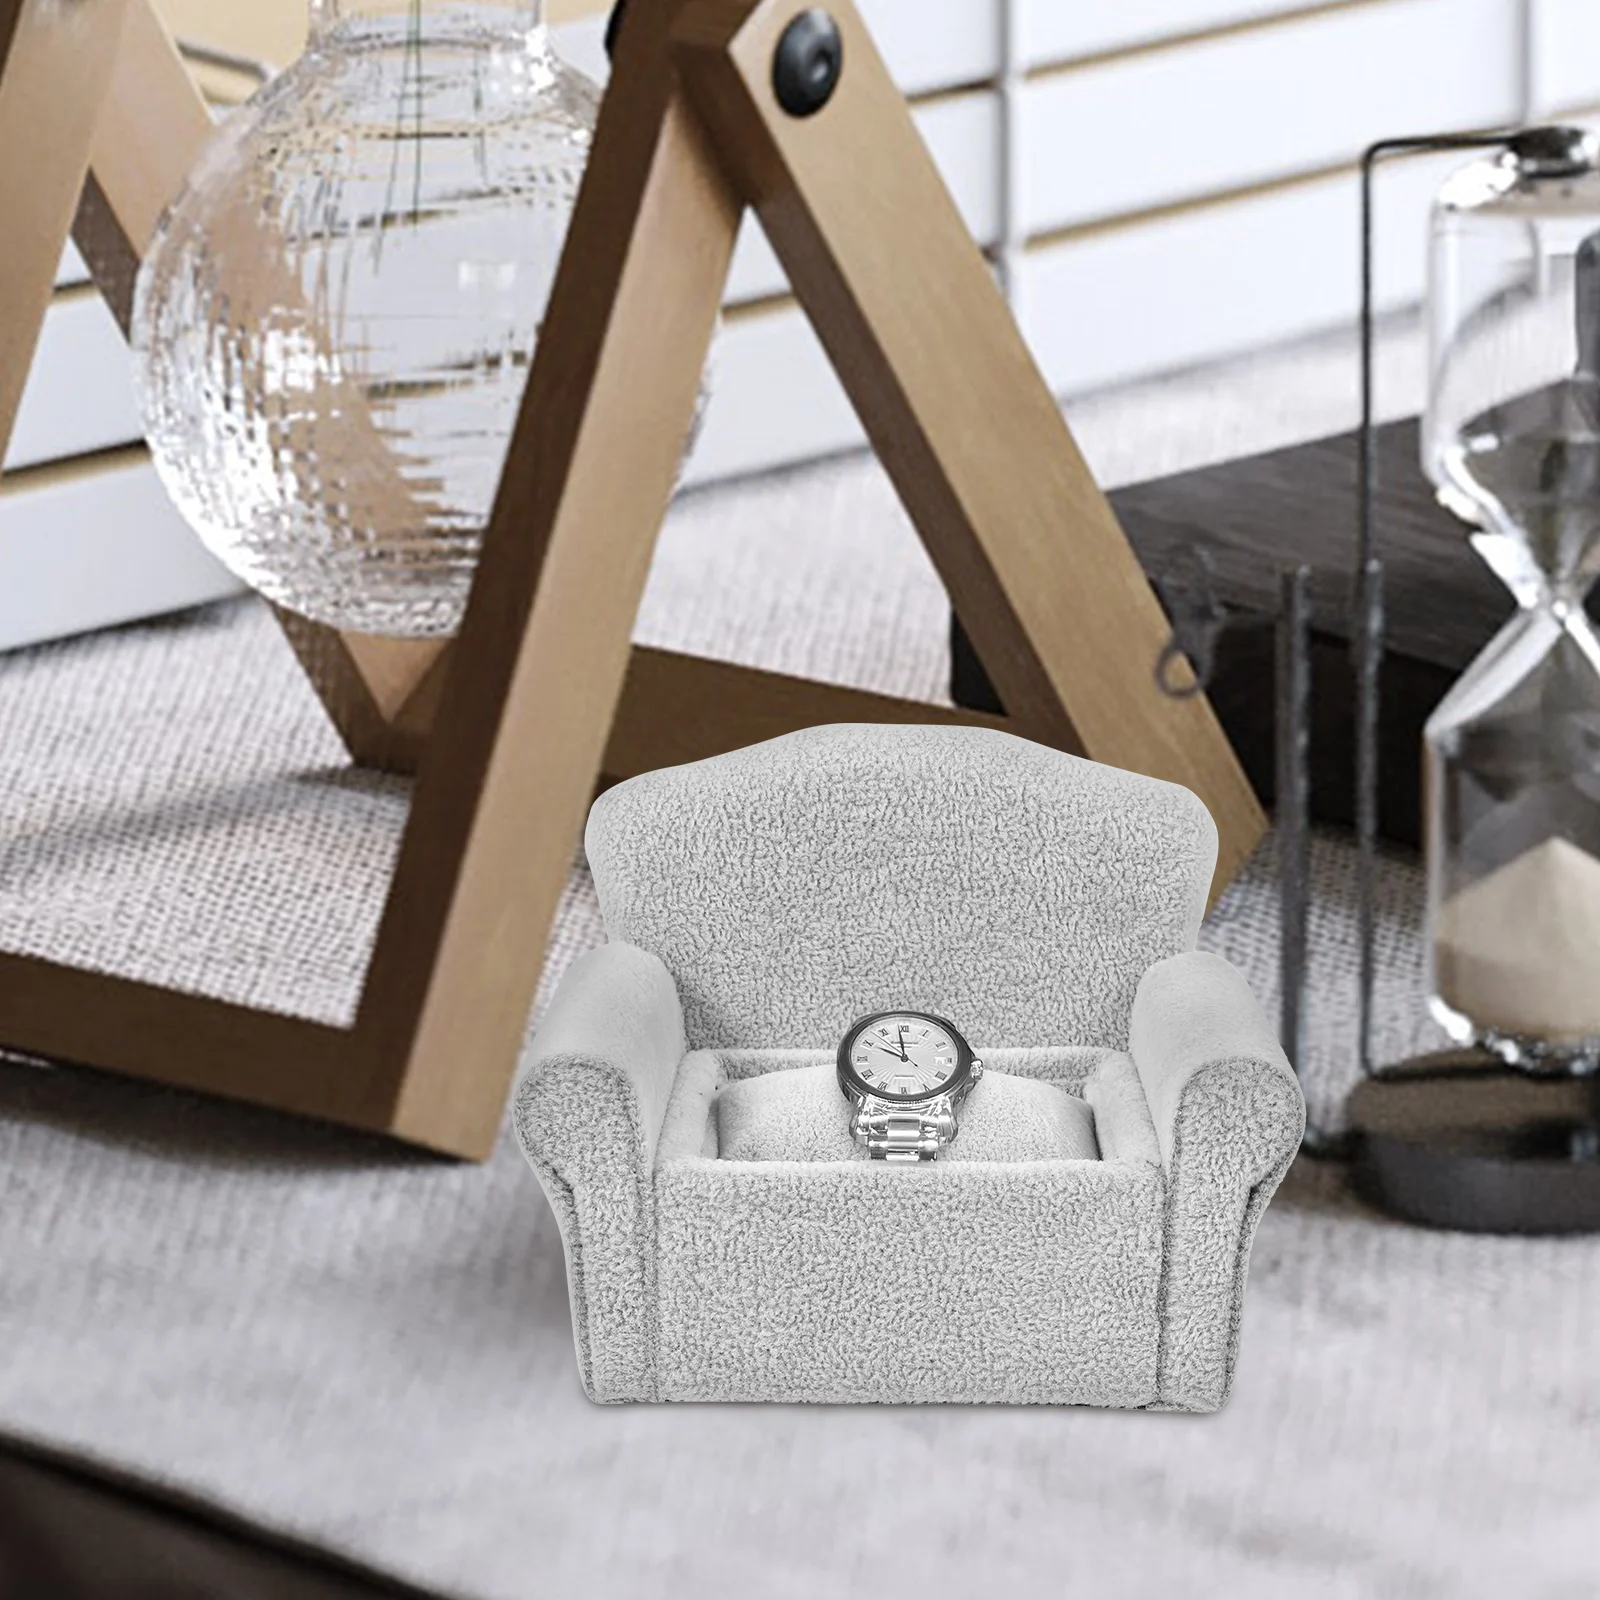 Sofa Shape Watch Display Holder Jewelry Display Holder Portable Bracelet Display Box with Single Pillow top watch 2pcs pillow jewelry big storage box creative drawer portable multilayer cosmetic storage box pu leather jewelry box